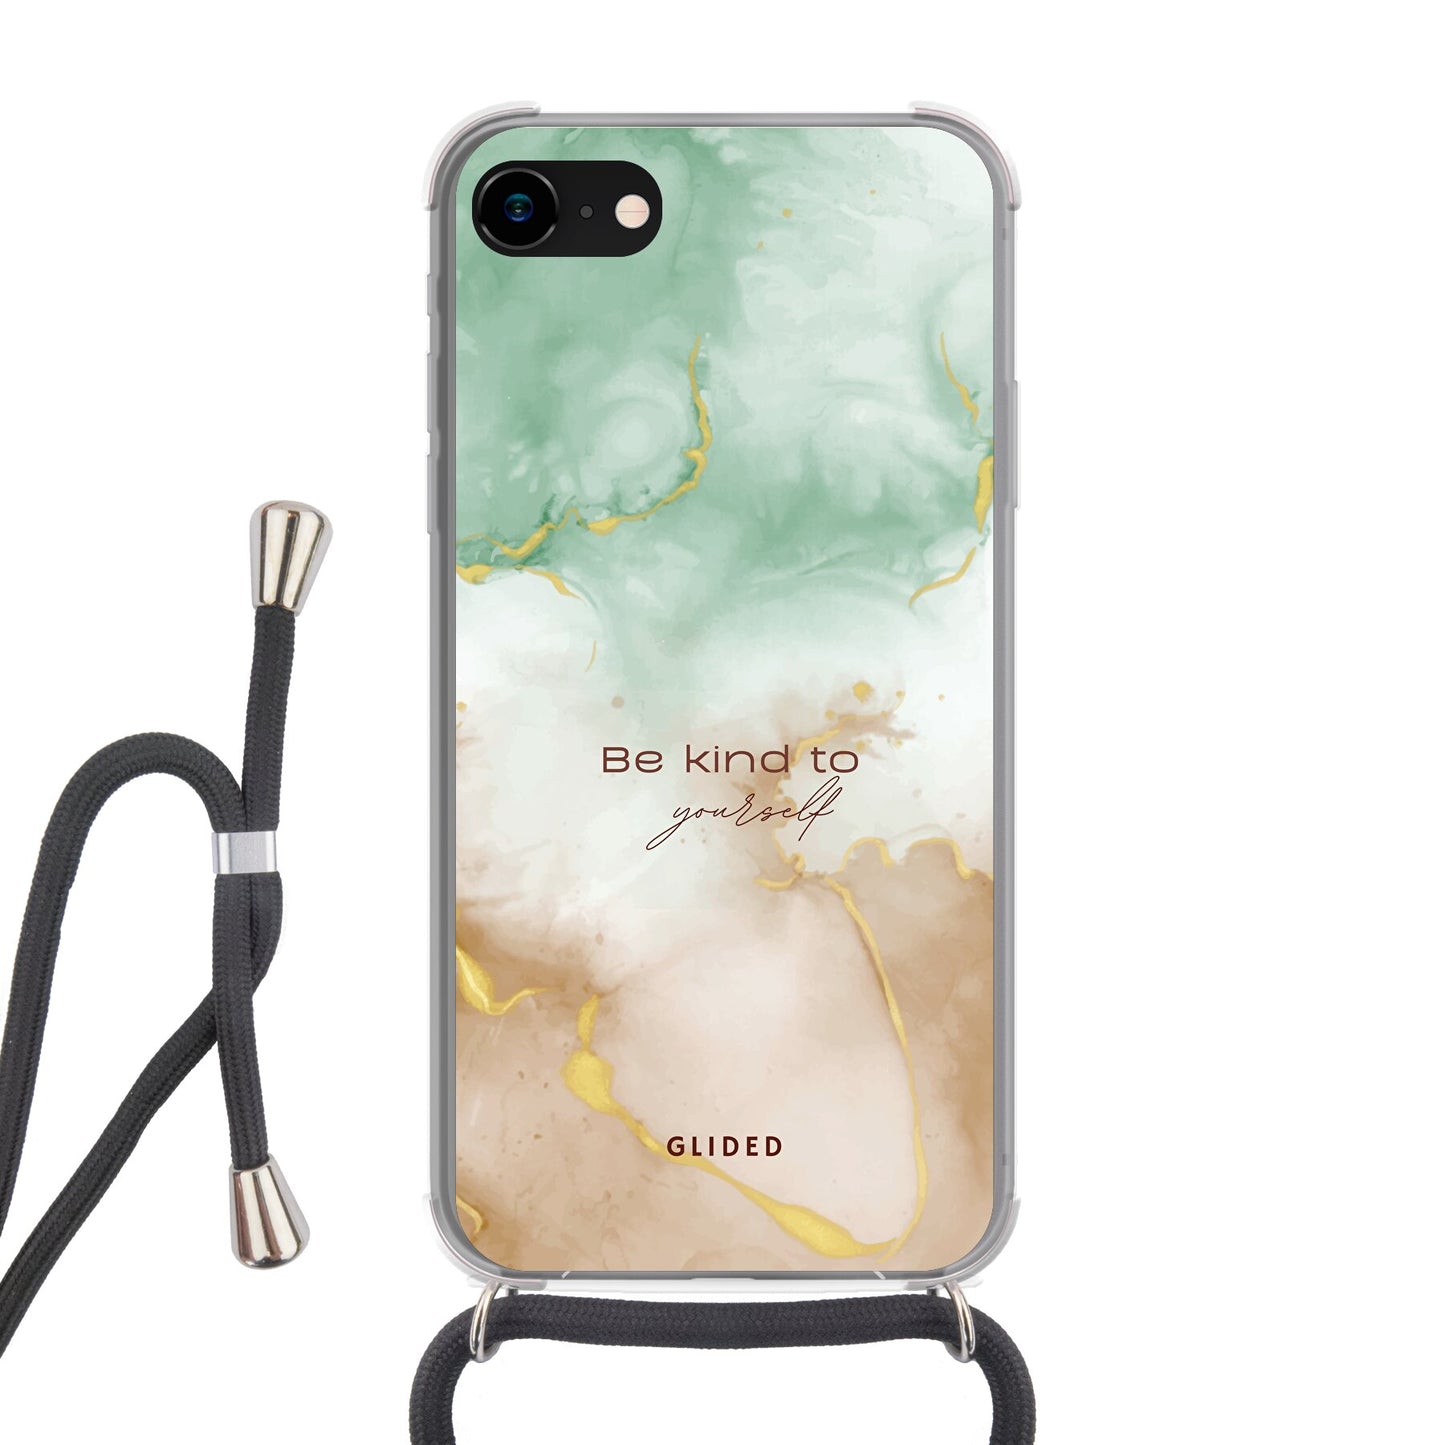 Kind to yourself - iPhone 7 Handyhülle Crossbody case mit Band